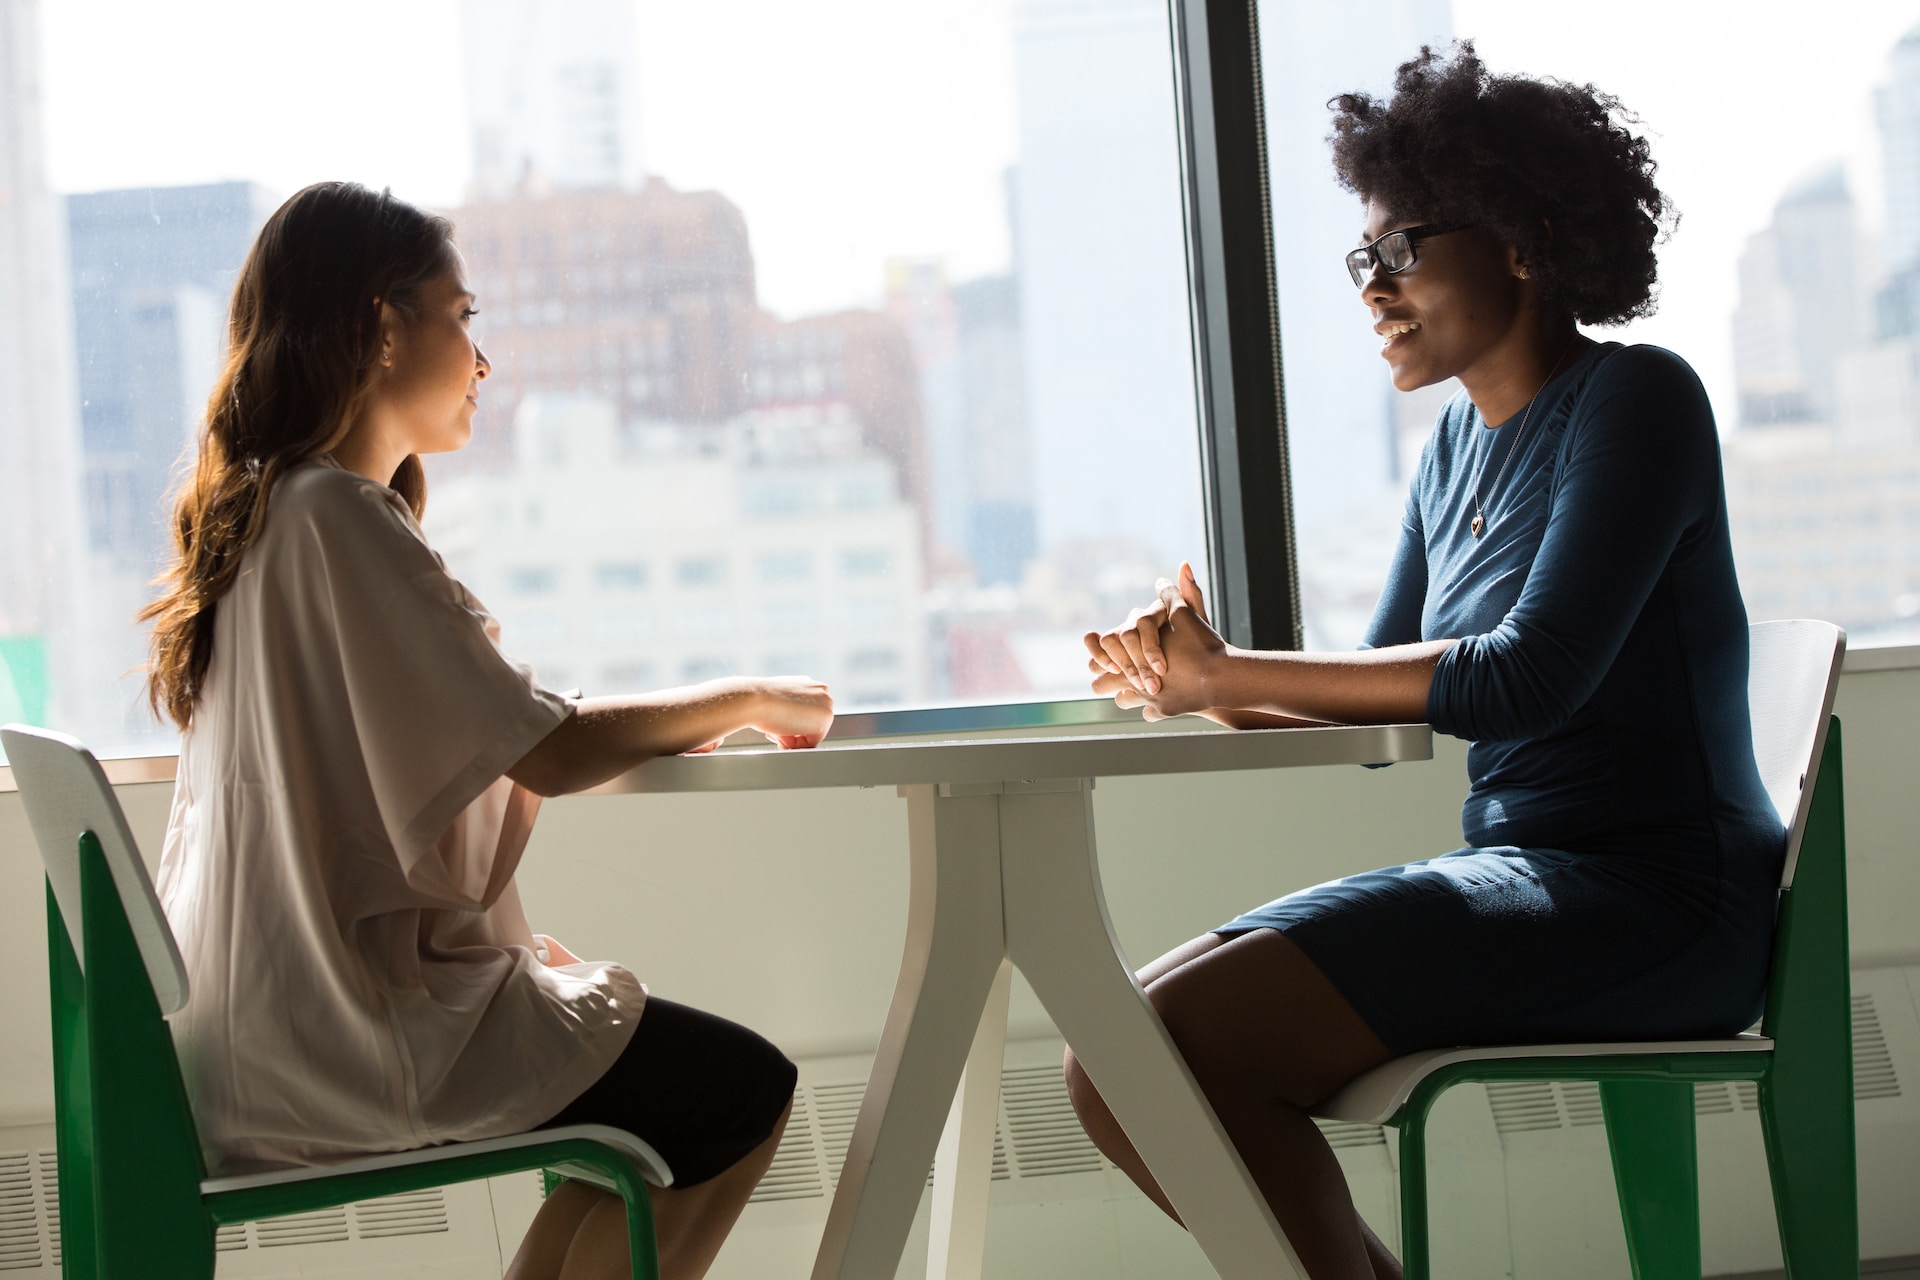 Ace Your Next Job Interview with These 5 Simple Tips